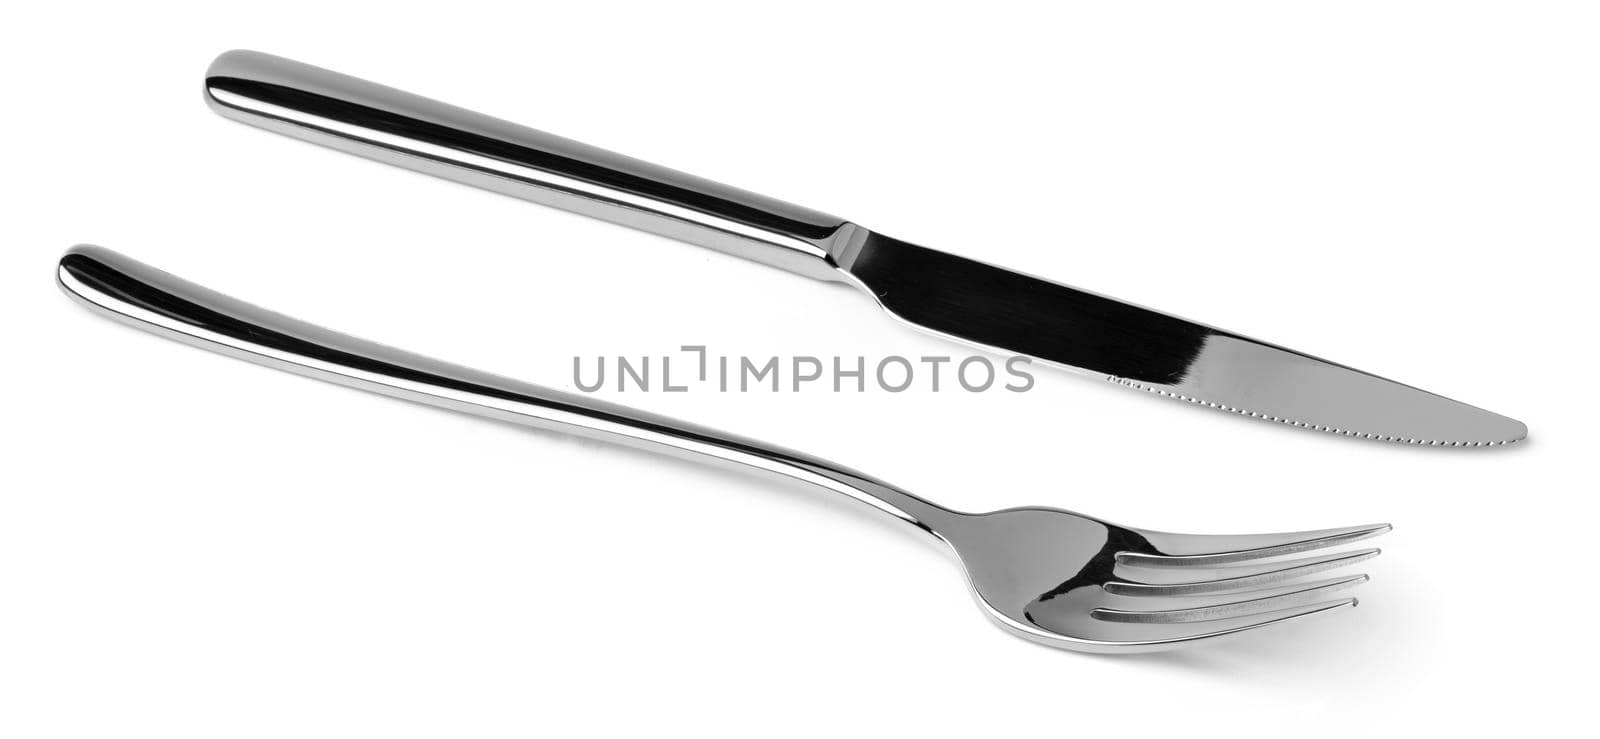 Silver fork and knife isolated on white background by Fabrikasimf